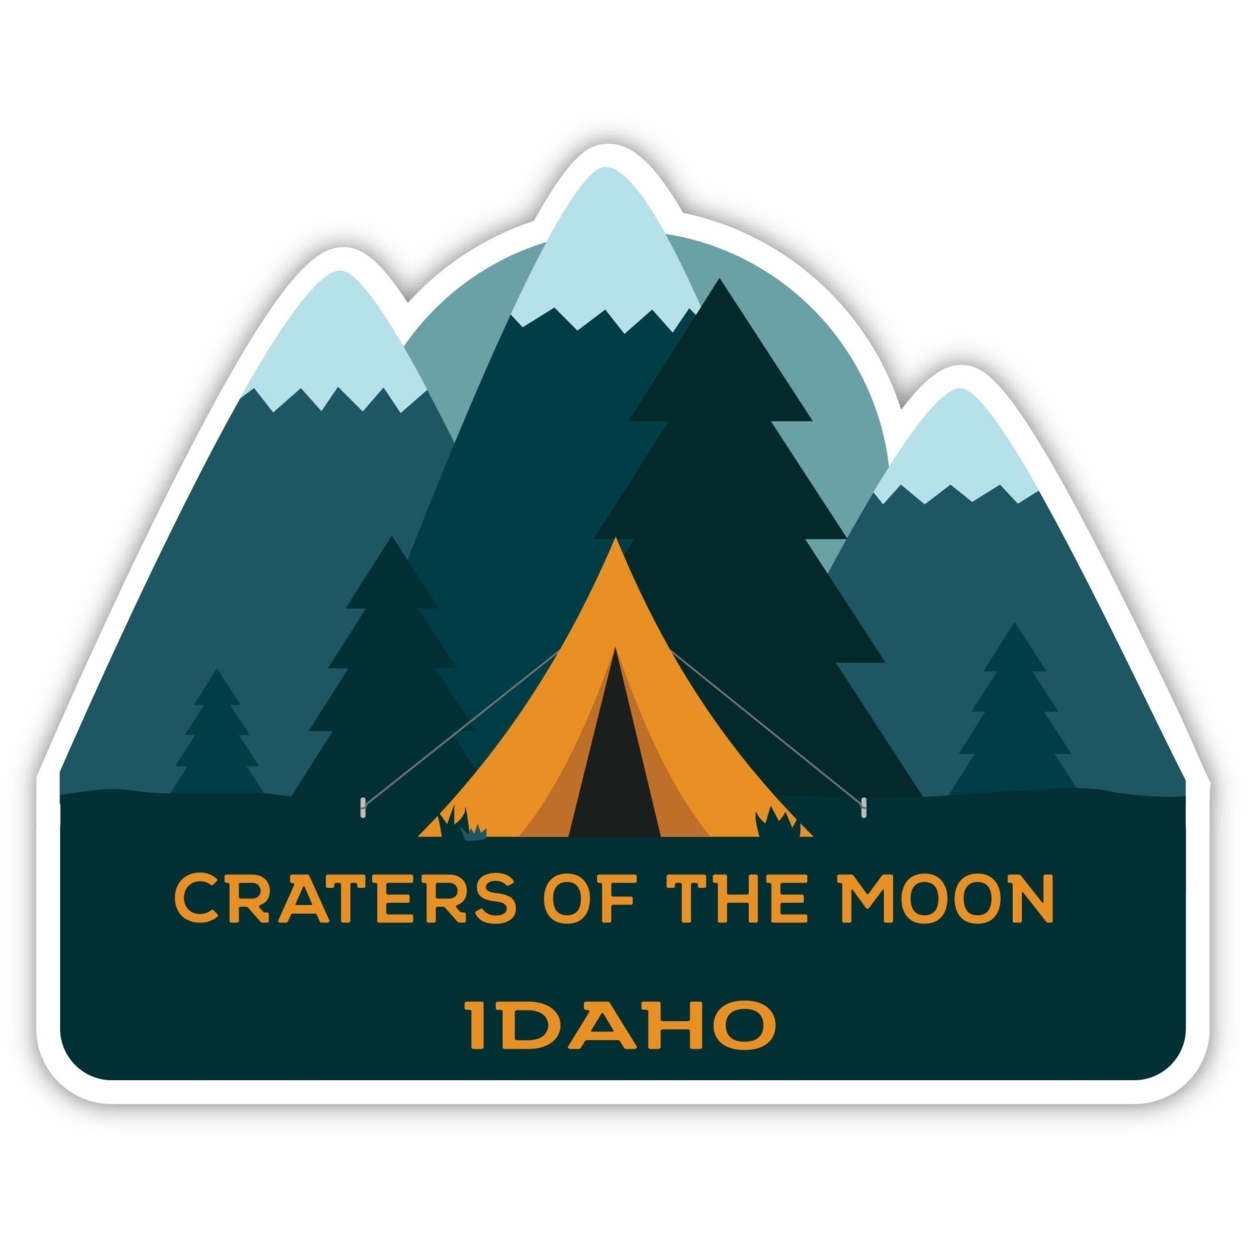 Craters Of The Moon Idaho Souvenir Decorative Stickers (Choose Theme And Size) - 4-Pack, 4-Inch, Bear